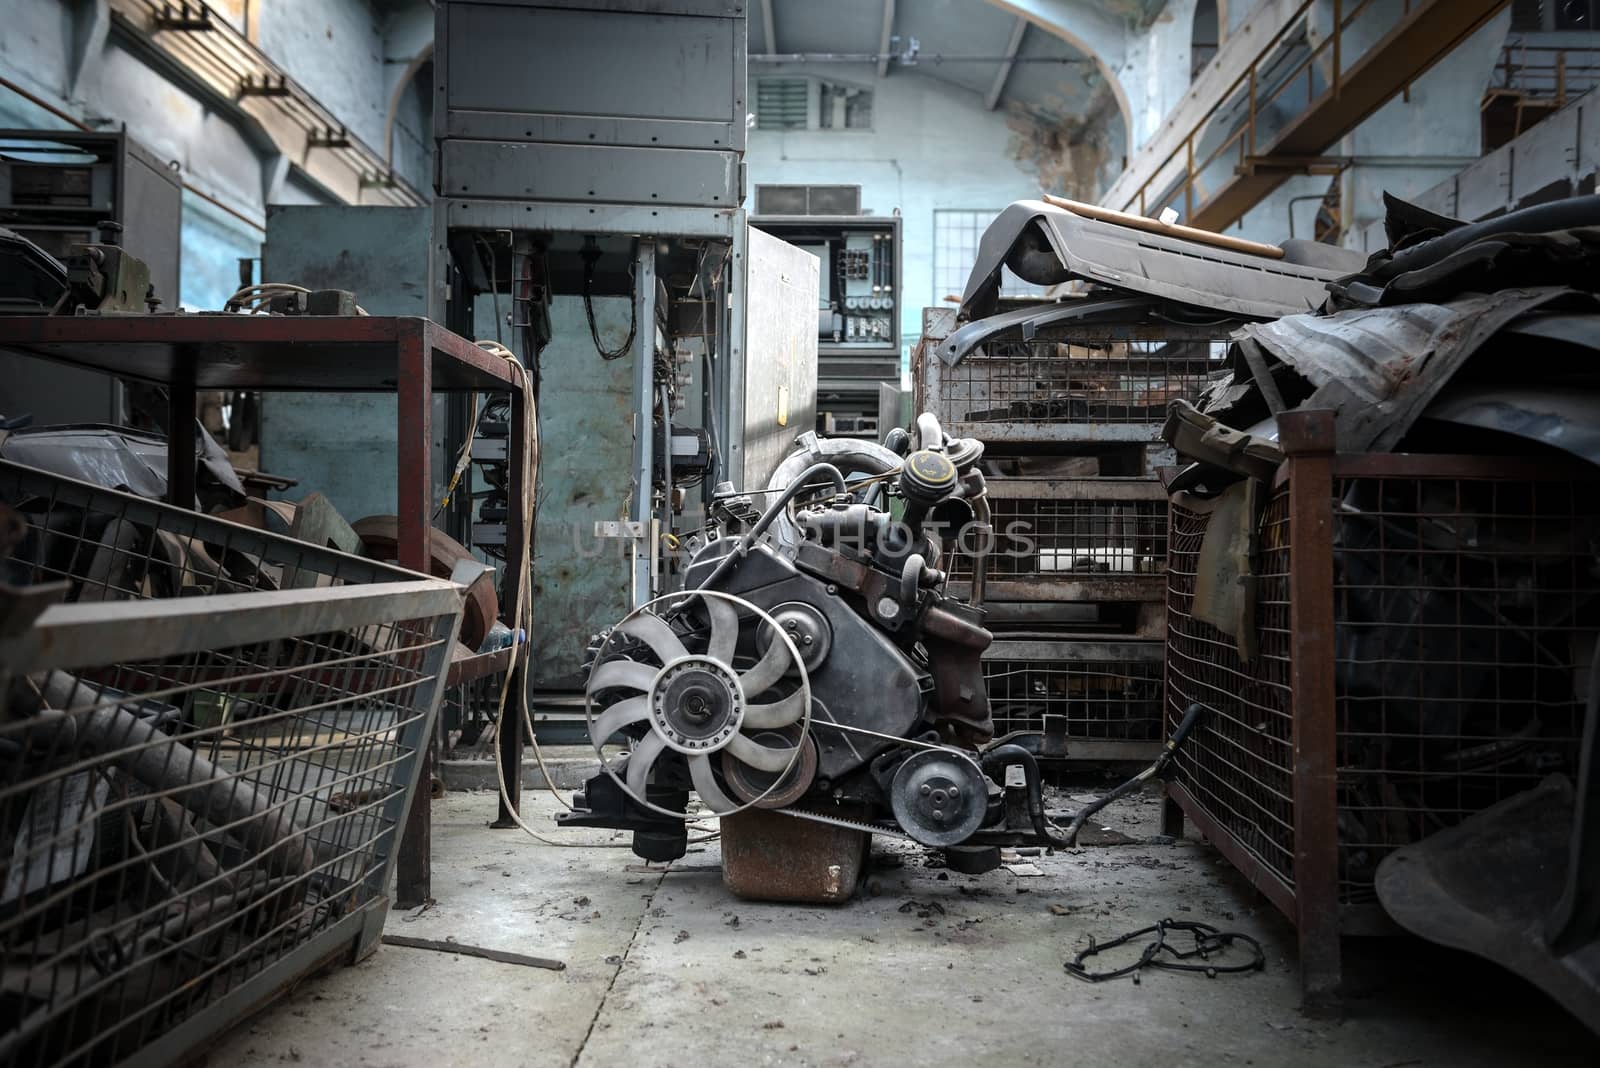 The image of an used engine in empty factory